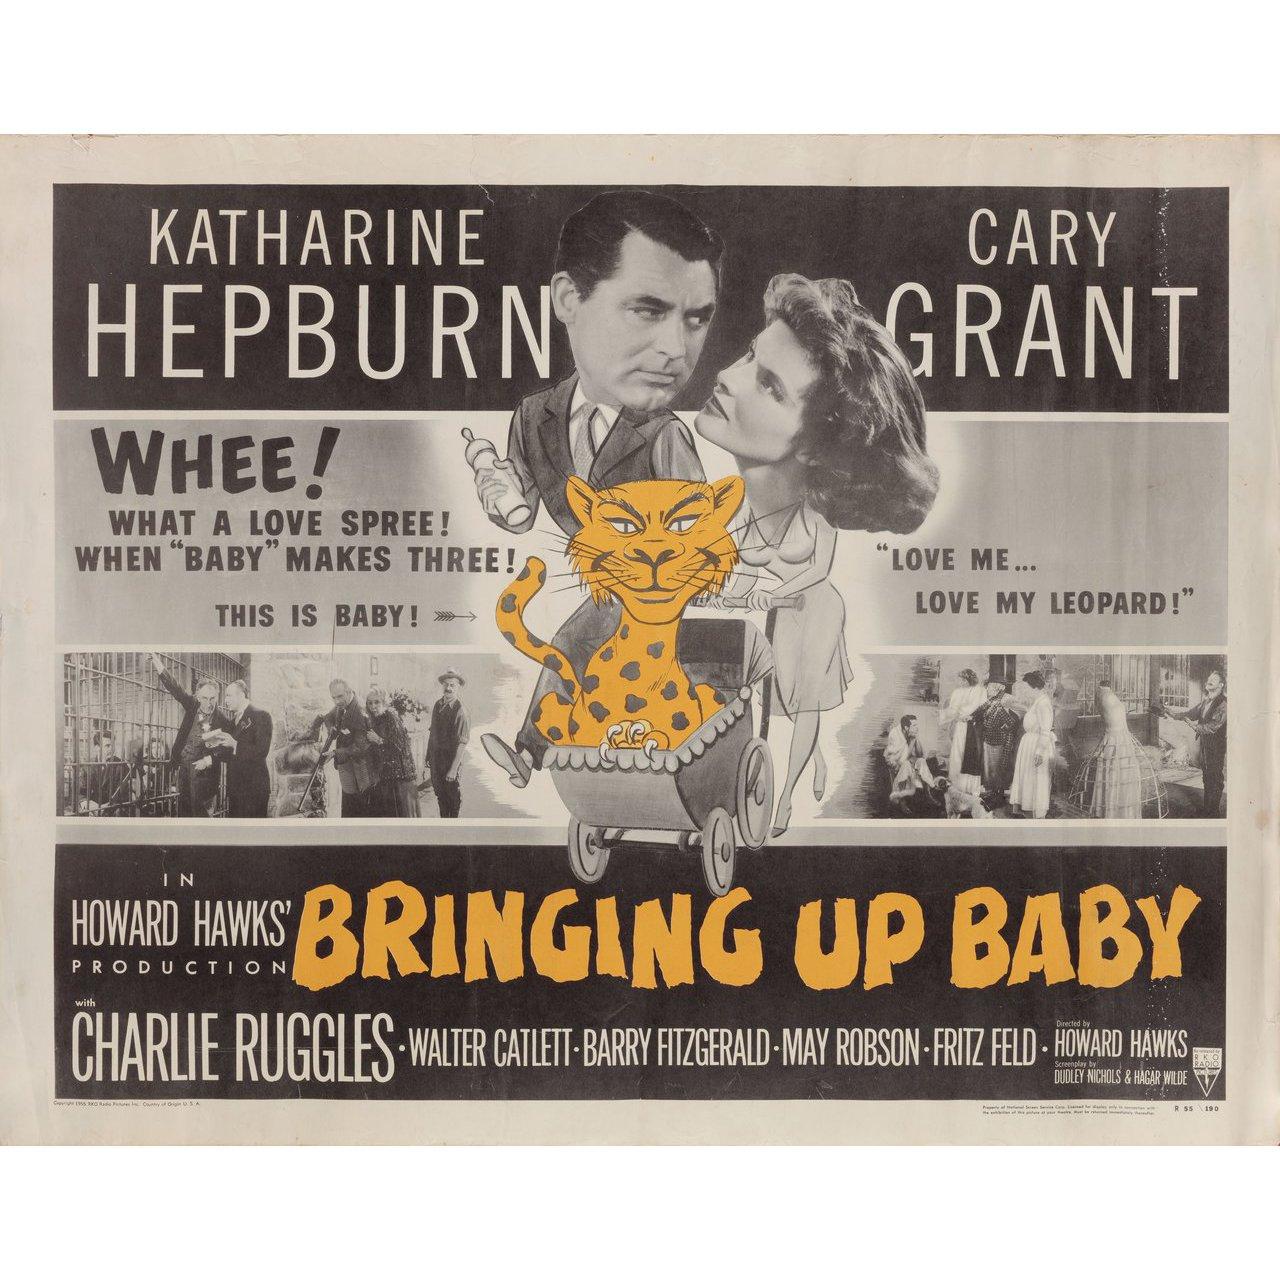 Original 1955 re-release U.S. half sheet poster for the 1938 film Bringing Up Baby directed by Howard Hawks with Katharine Hepburn / Cary Grant / Charles Ruggles / Walter Catlett. Very Good condition, rolled with slight creases. Please note: the